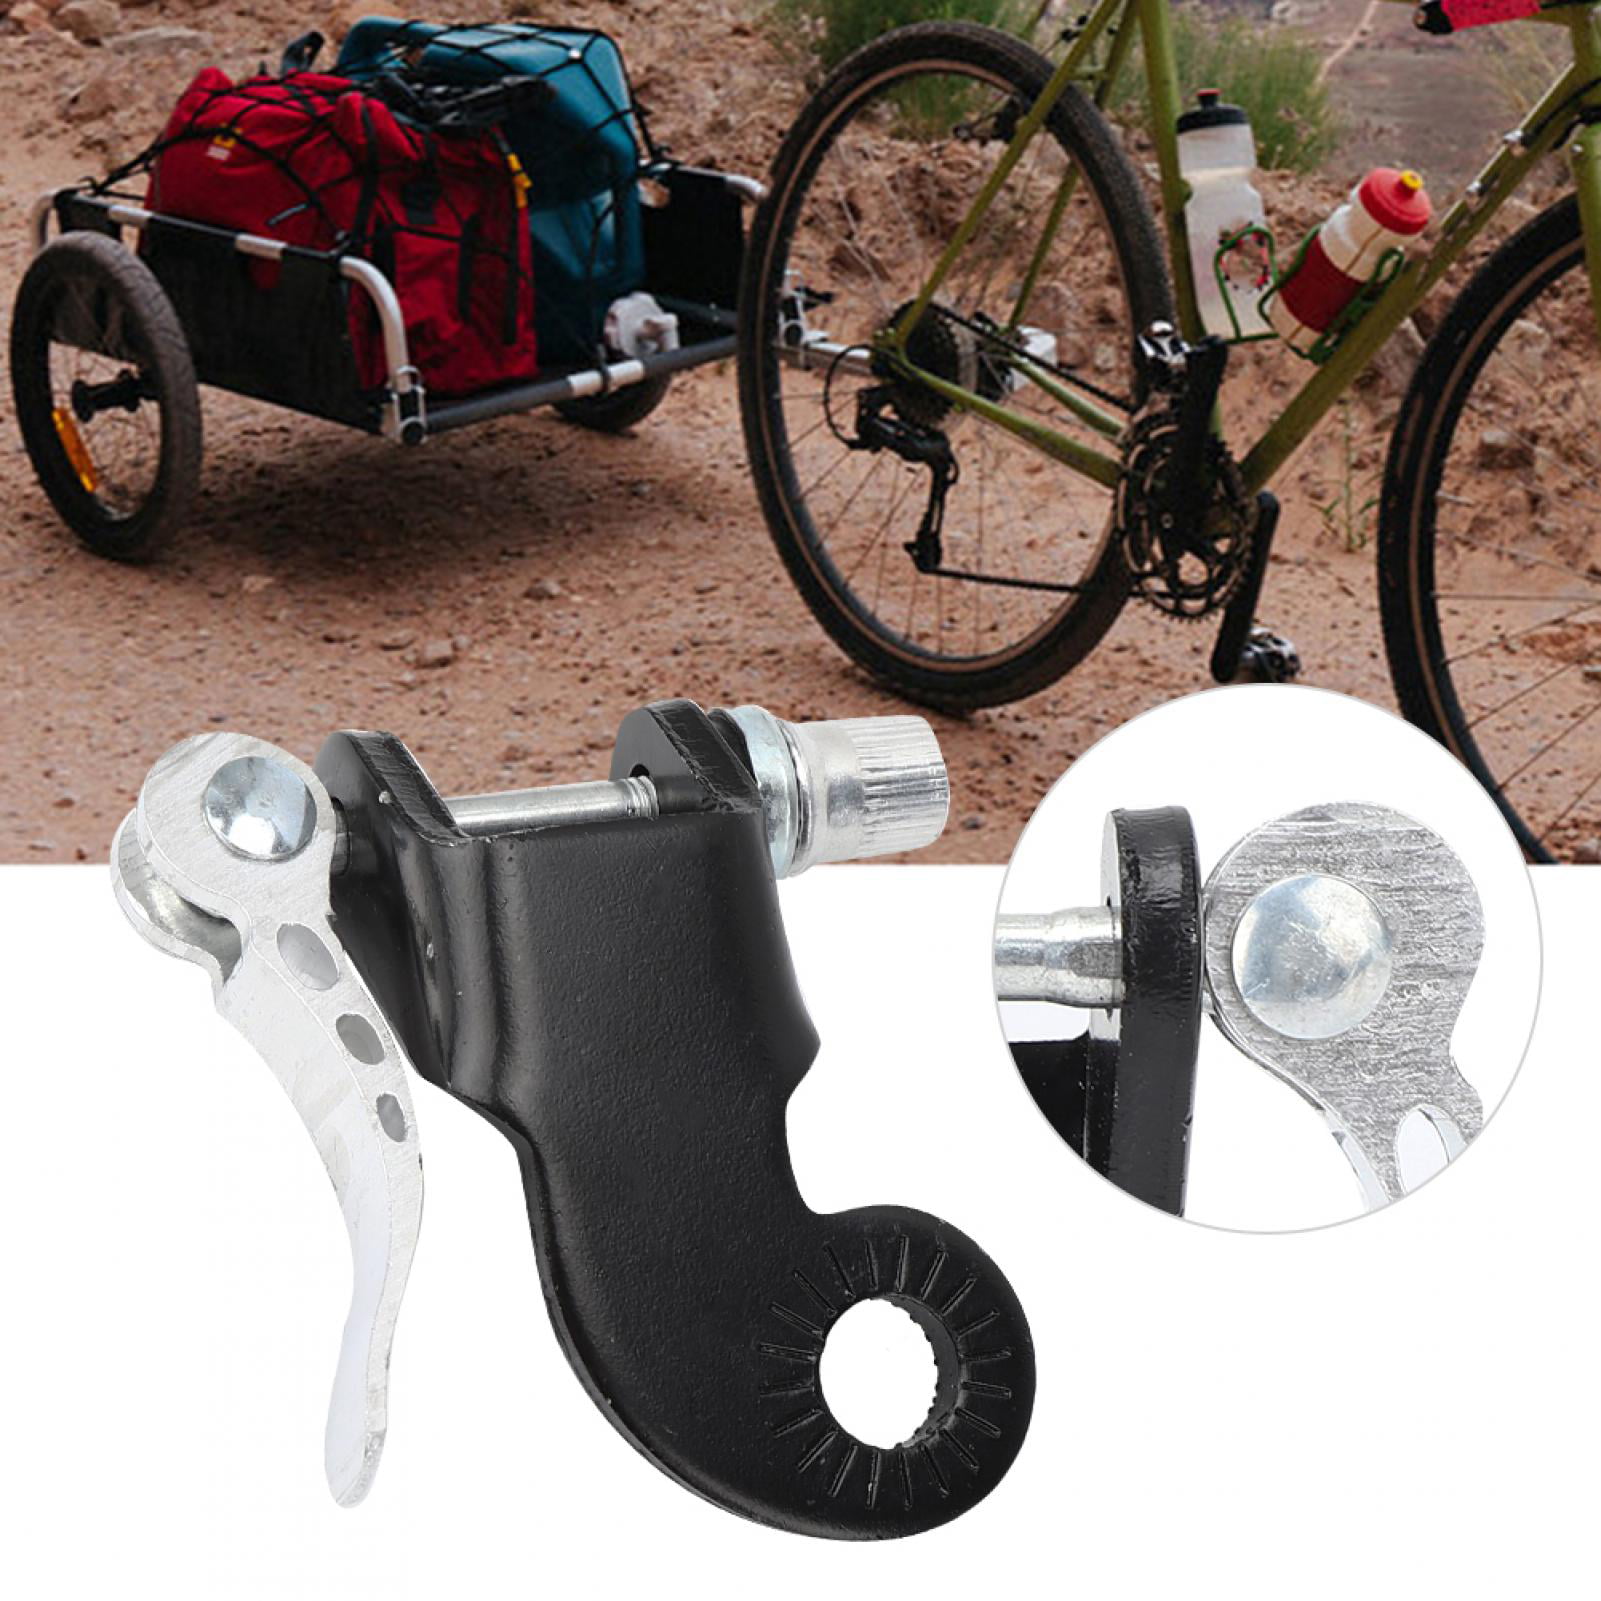 Steel Convenient to Carry Bicycle Trailer Attachment Mini Size Towing Hook Bike Accessories Quick Loading and Unloading Bike Trailer Hitch Coupler 